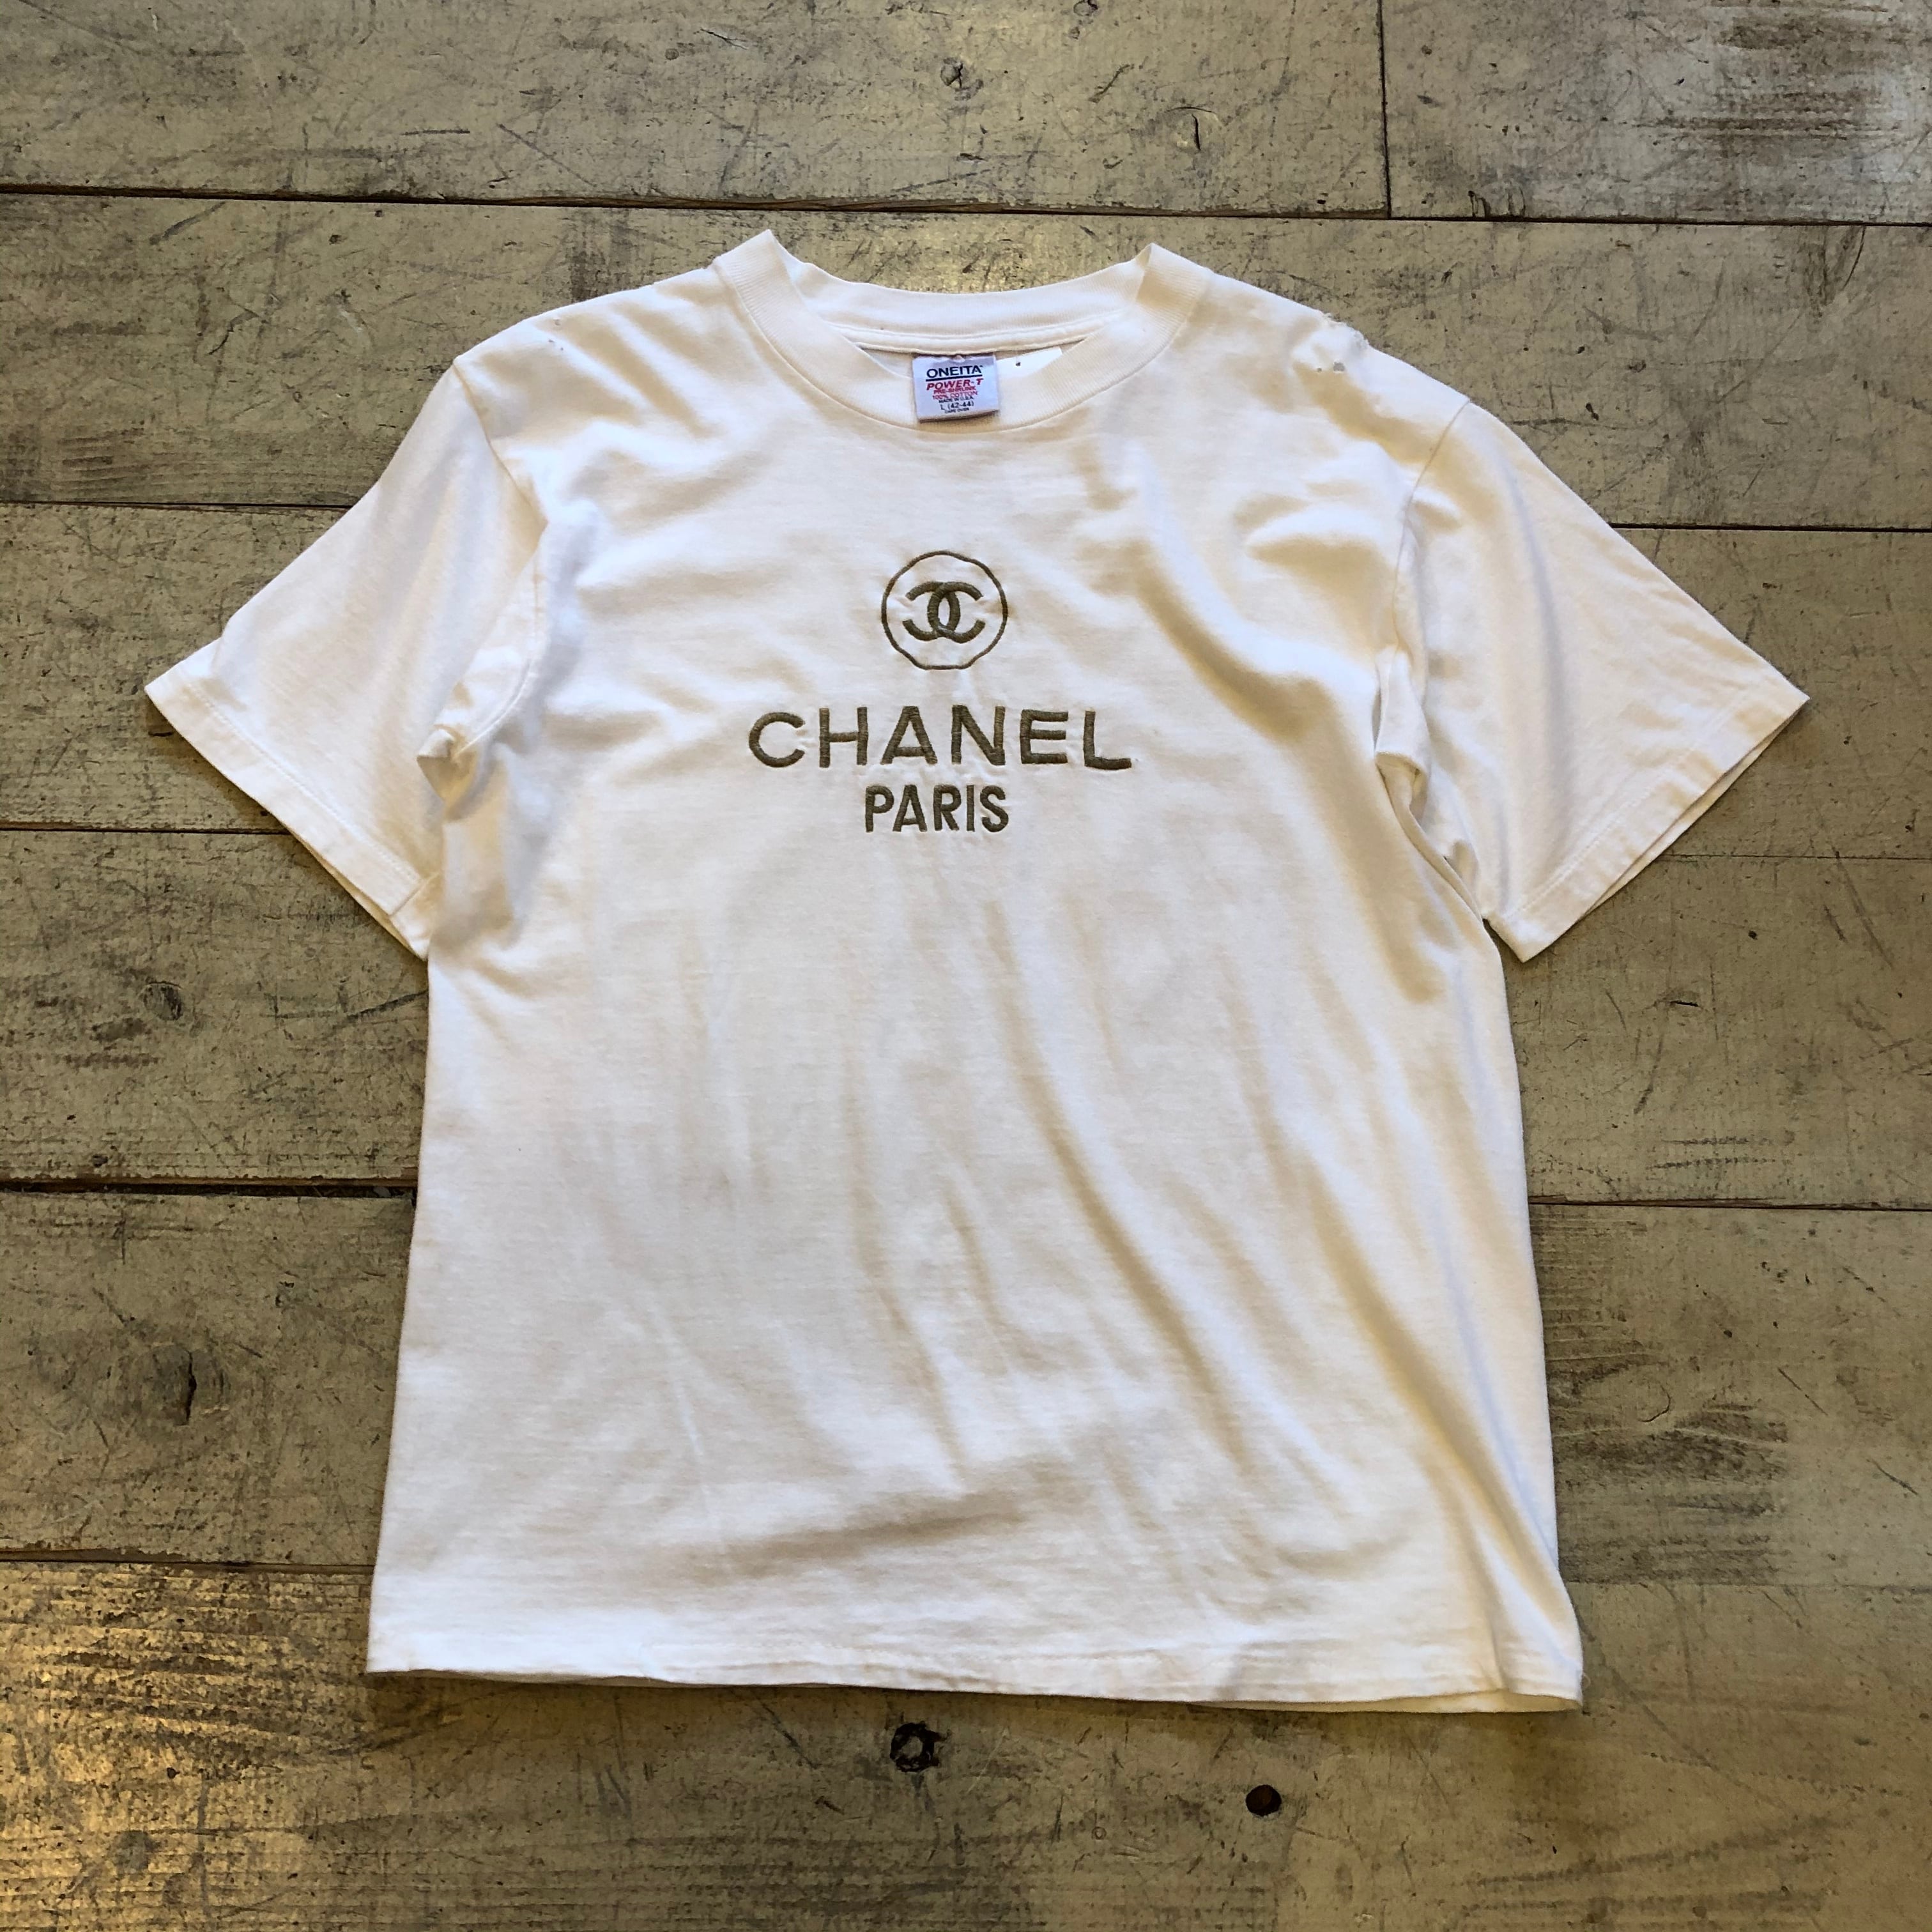 90s bootleg CHANEL logo T-shirt | What'z up